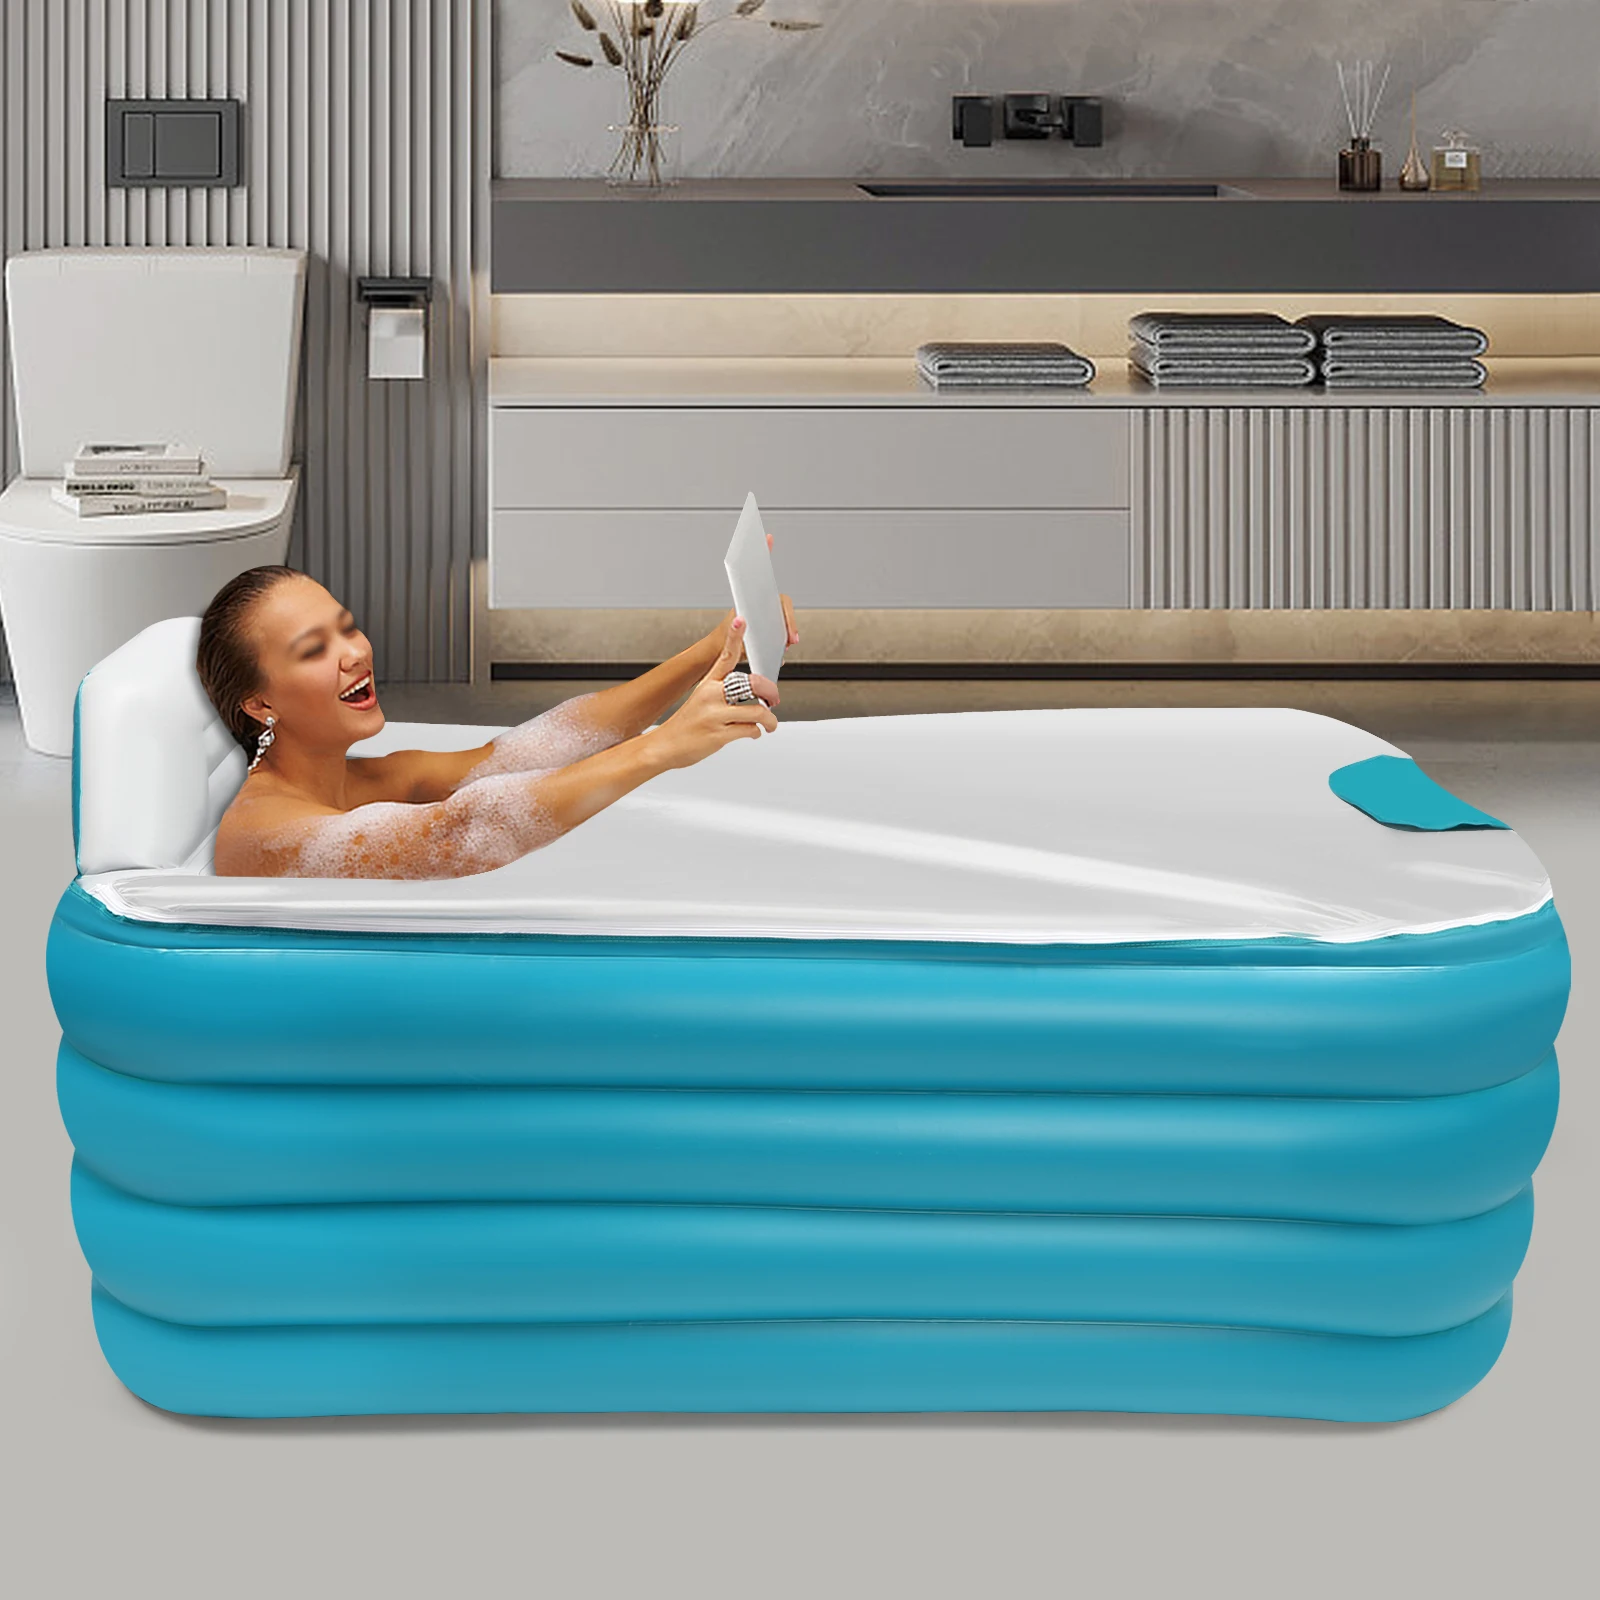 Inflatable Adult Bath Tub Free-Standing Blow Up Bathtub with Foldable Portable Feature for Adult Spa with Electric Air Pump